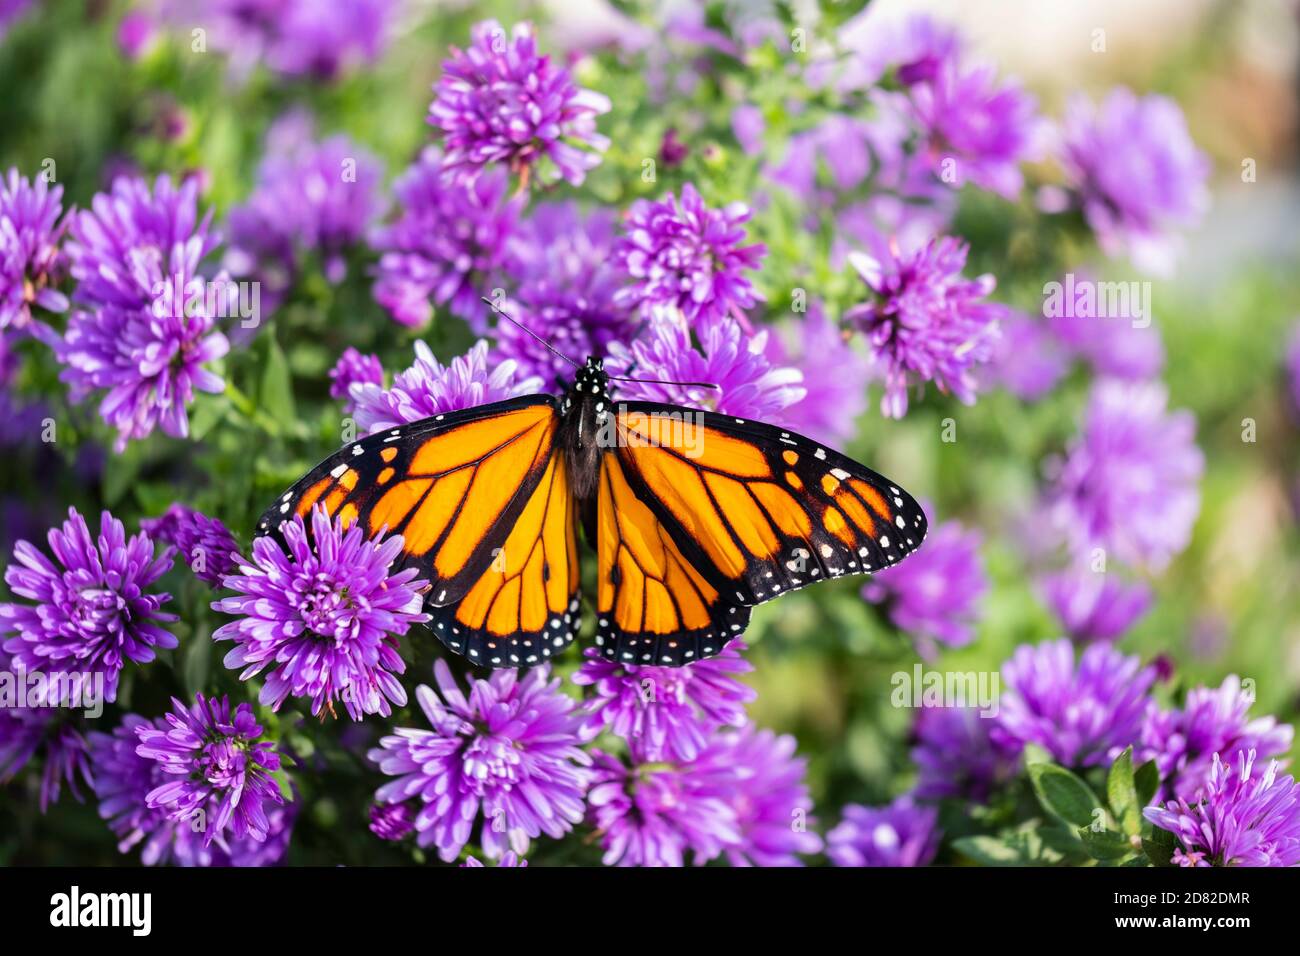 A male Monarch butterfly, Danaus plexippus, shortly after emerging, or enclosing. It's wings are not yet fully inflated. Kansas, USA. Stock Photo